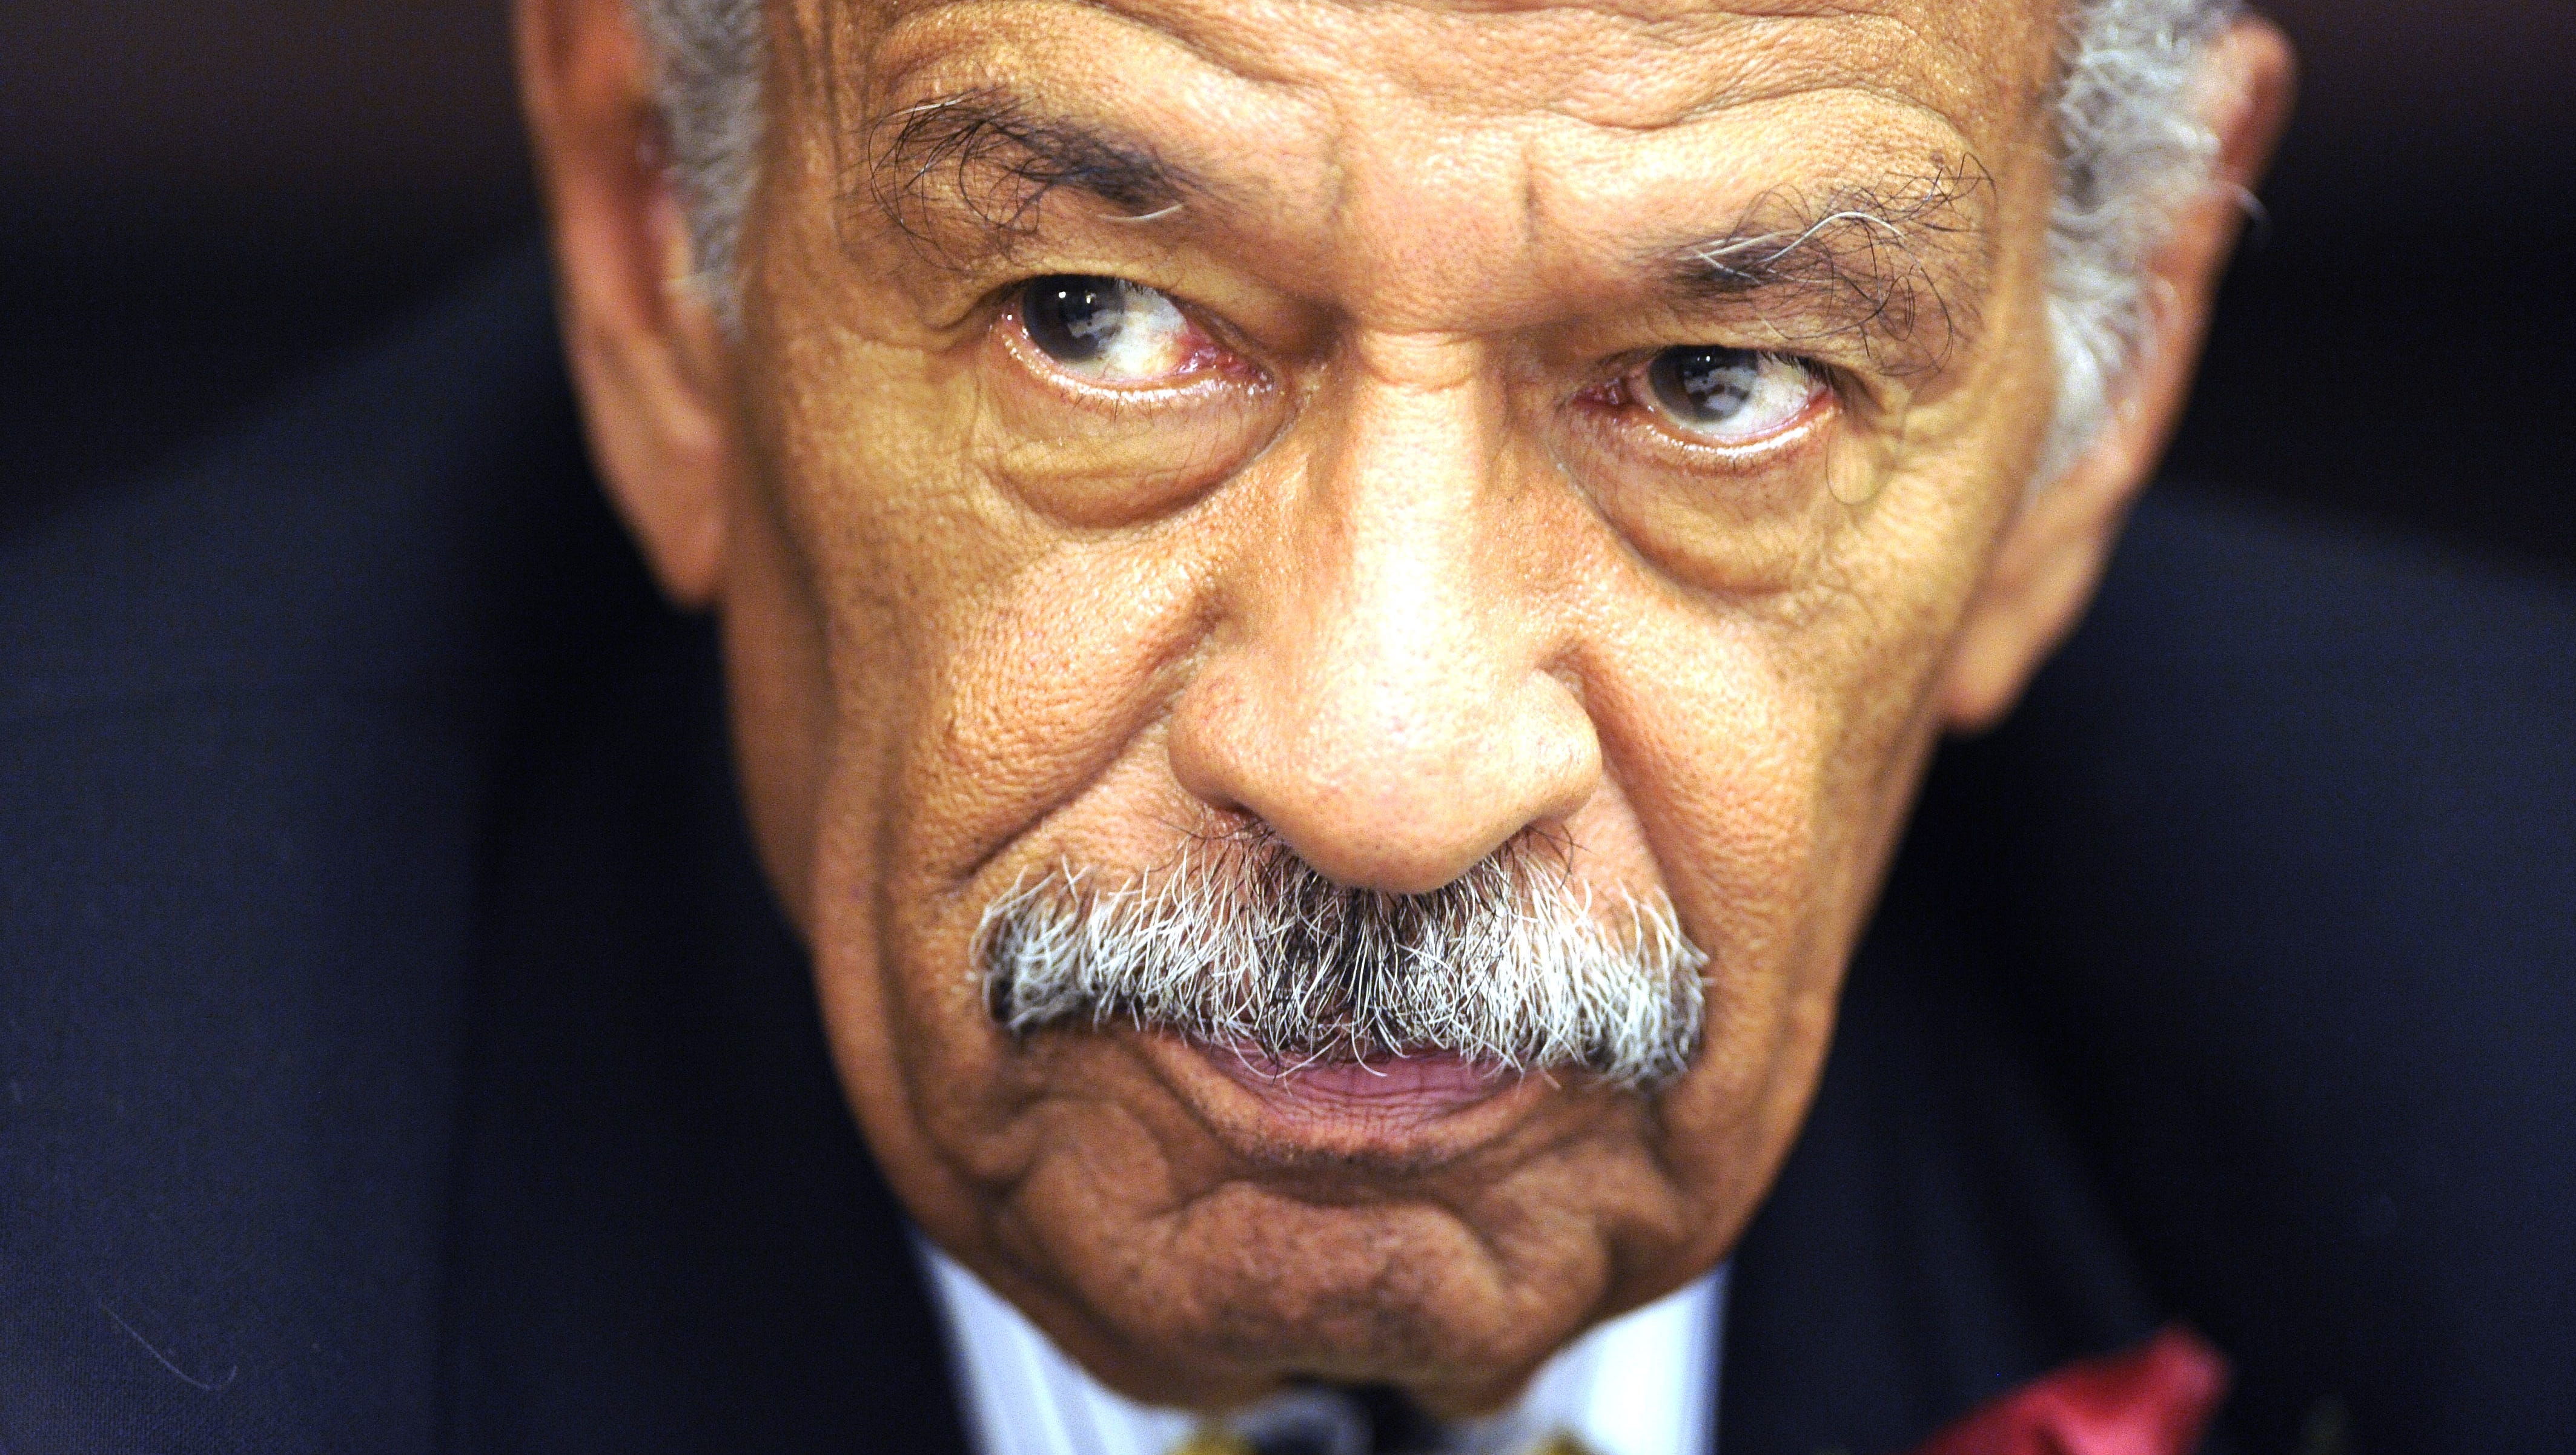 Rep. John Conyers, D-Detroit, the most senior member of Congress, addresses a House Judiciary subcommittee hearing on June 4, 2017. The accomplished lawmaker has resigned after 50-plus years in the House amid allegations of sexual misconduct by some former staffers.